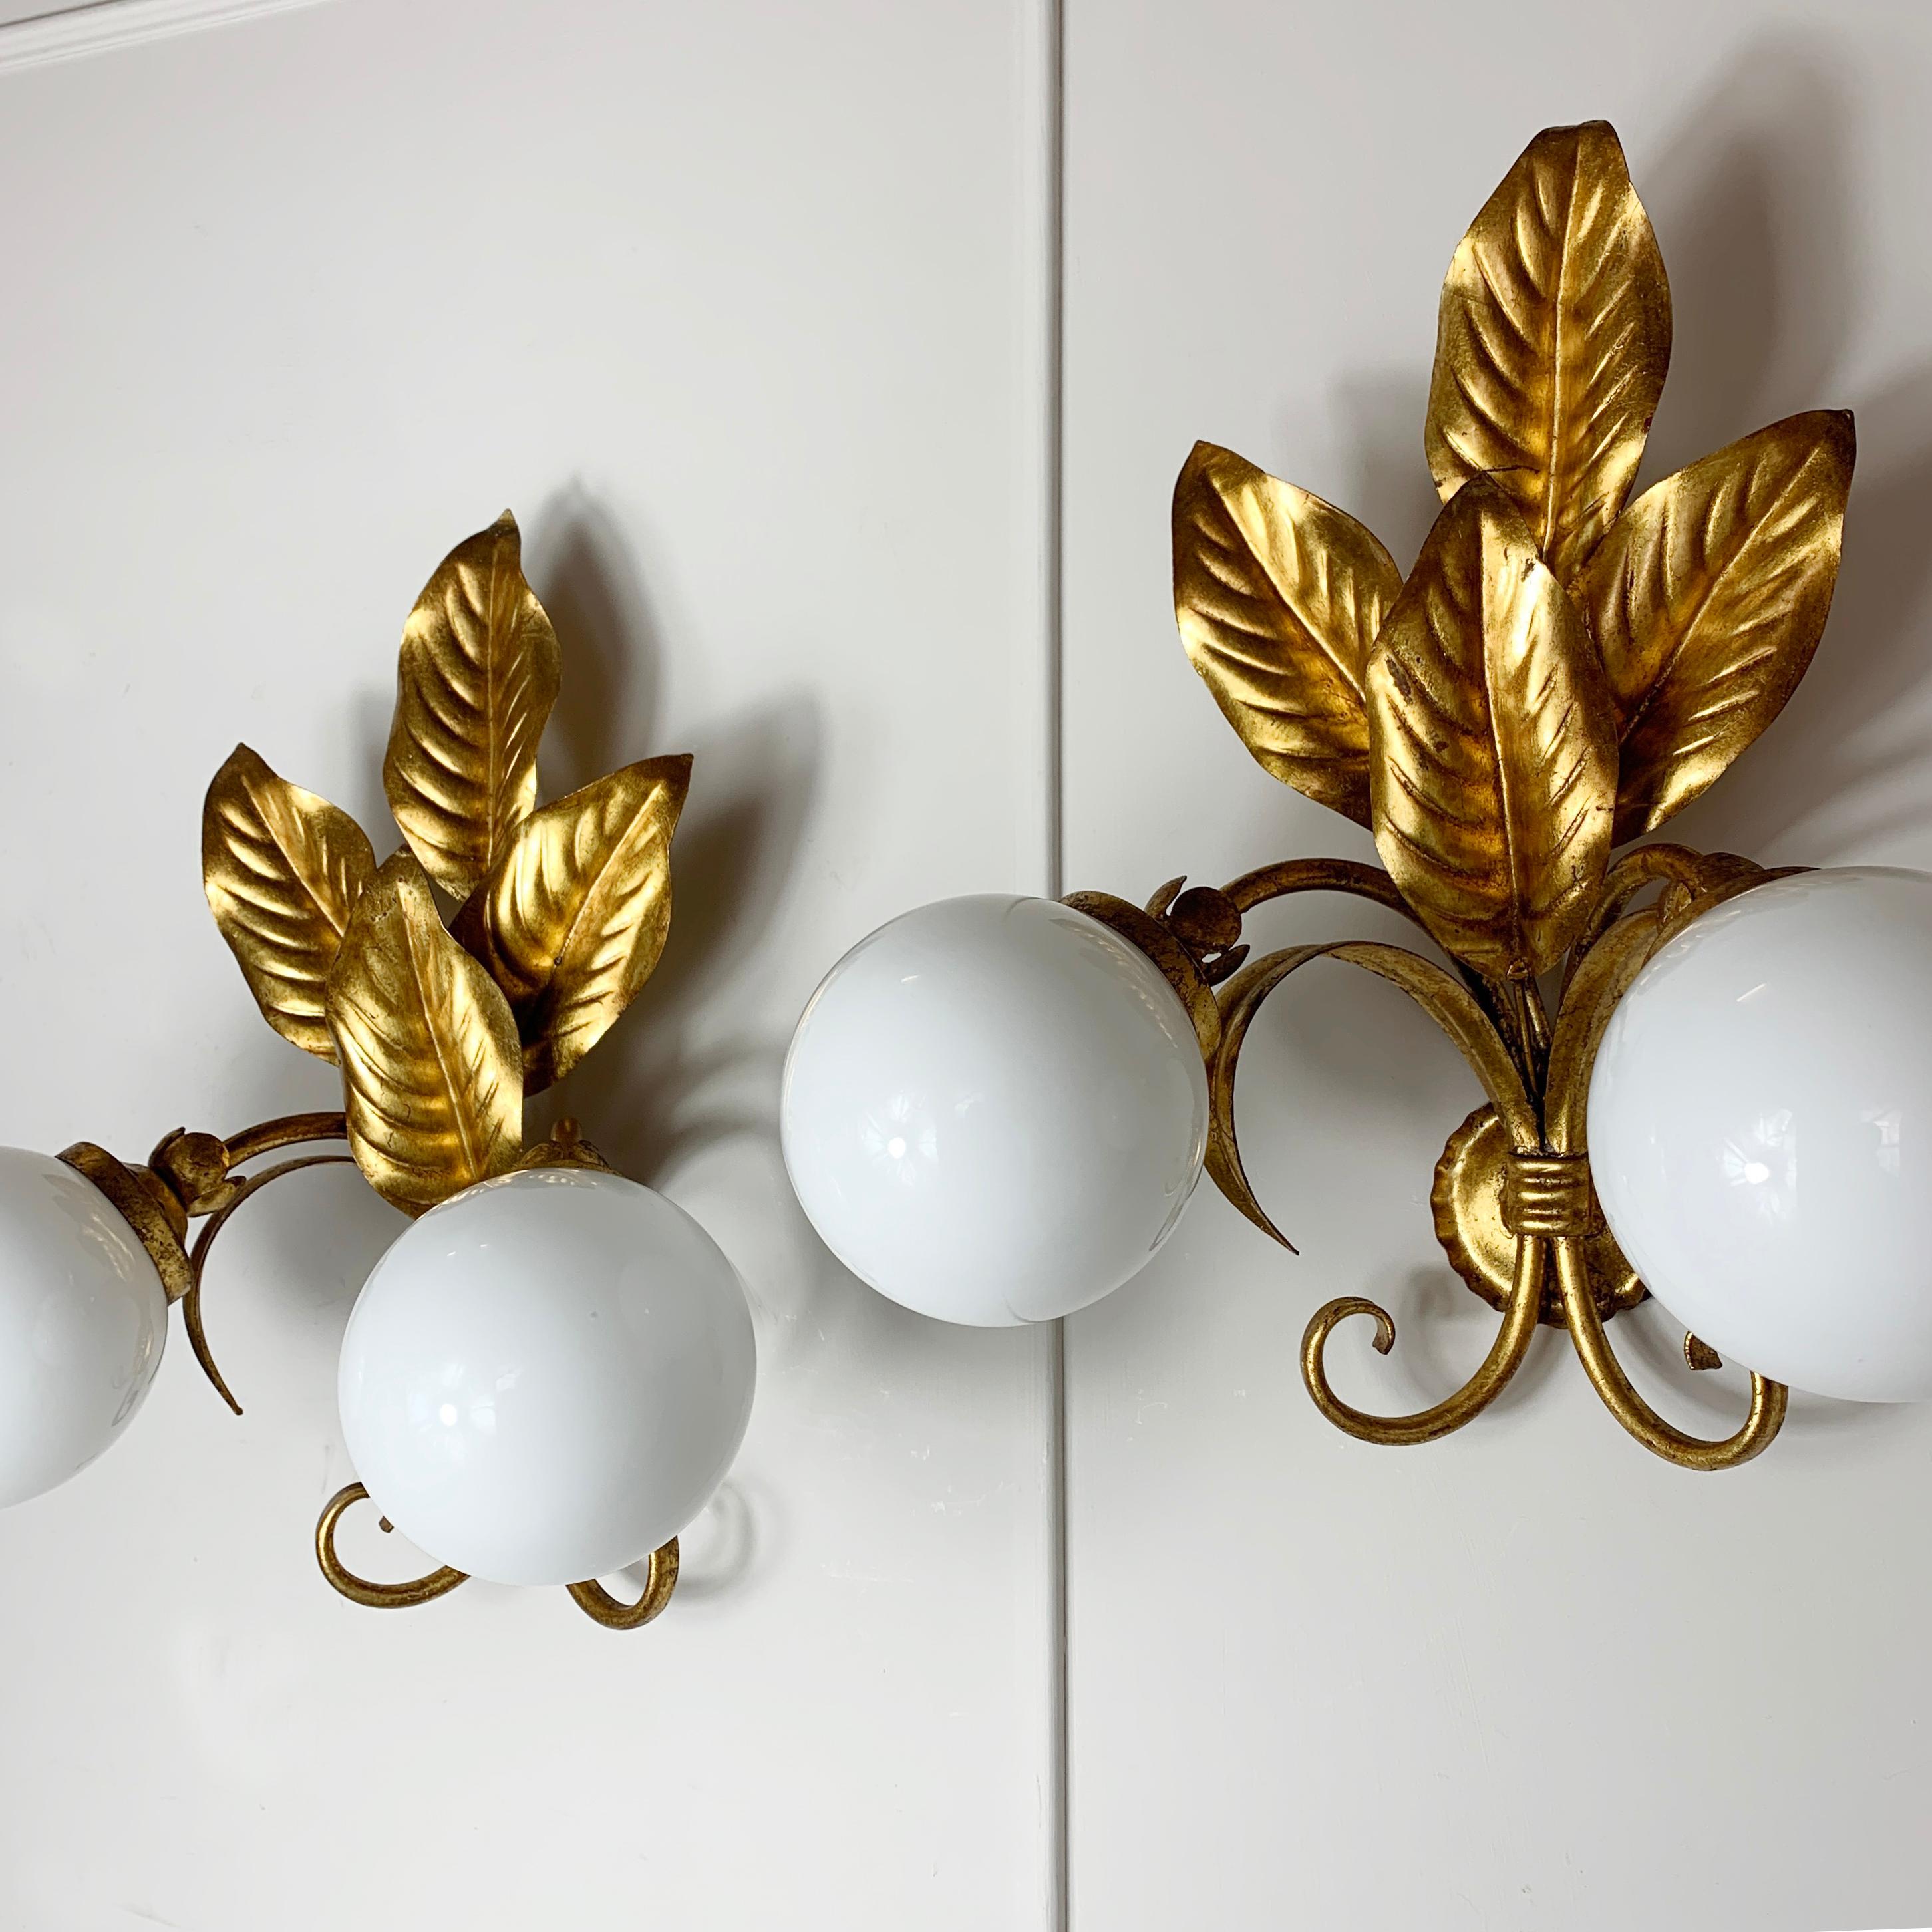 1950s French Feuilles D’or Wall Lights 2